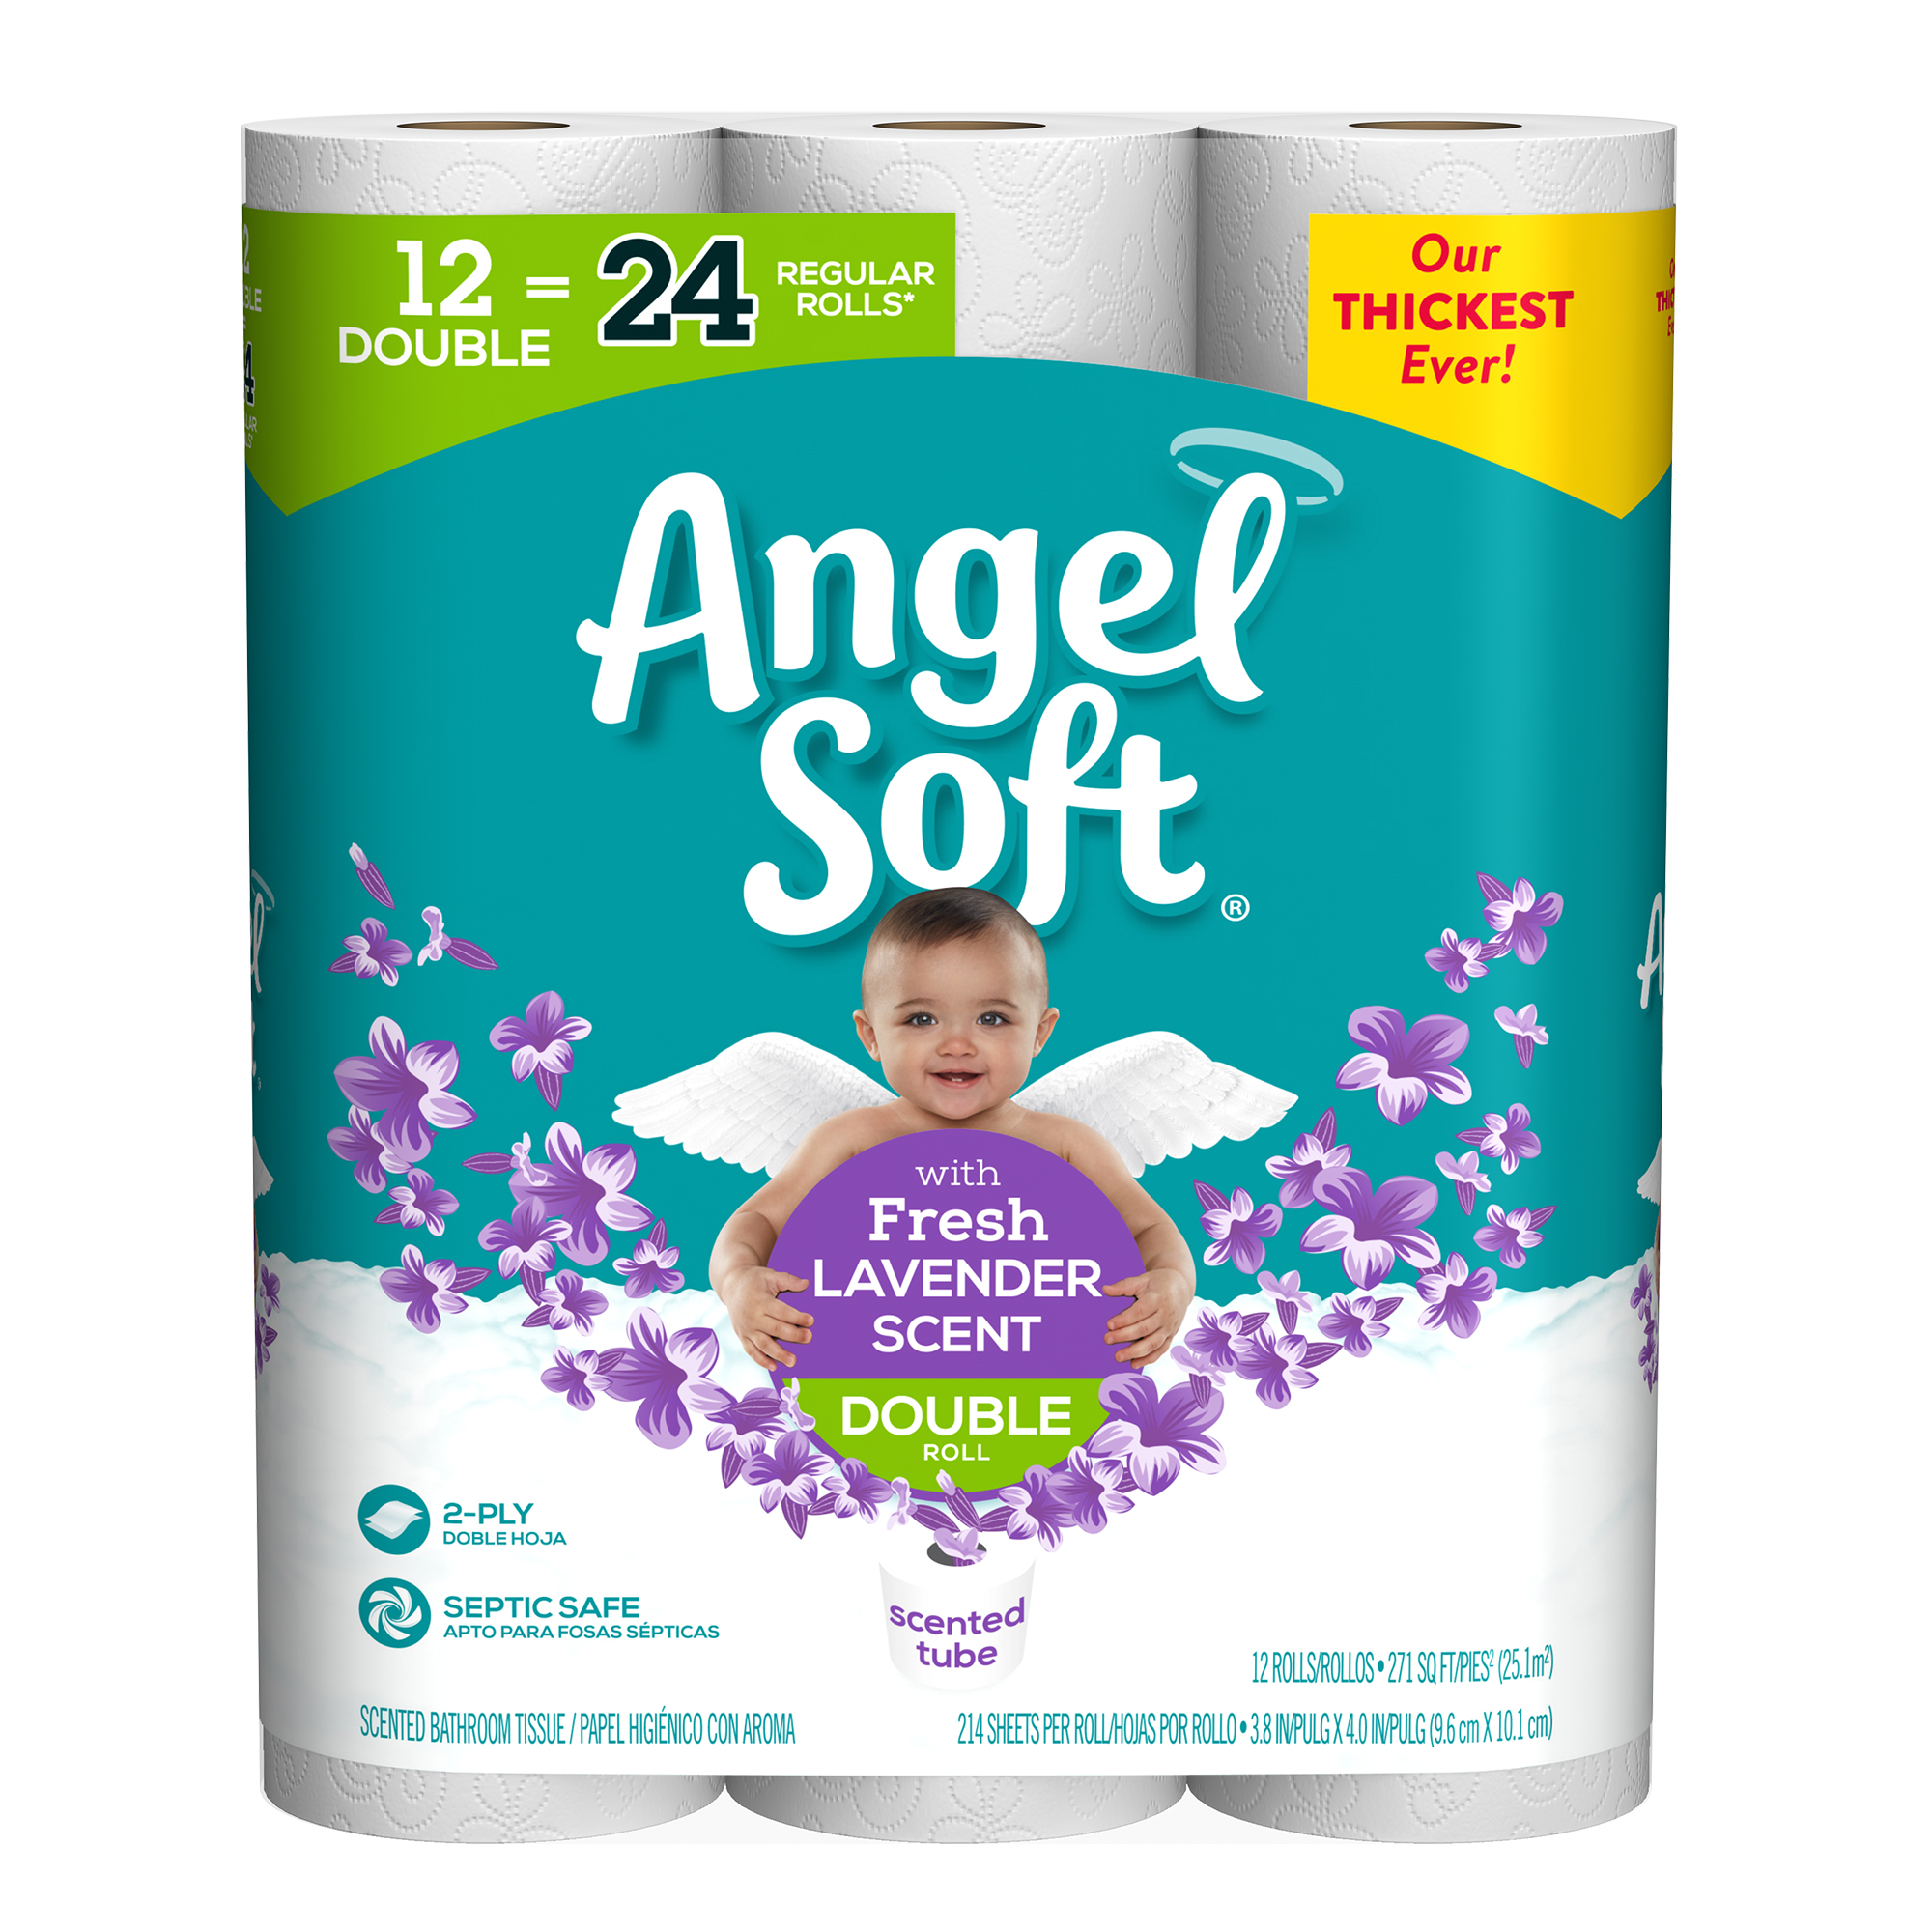 Angel Soft Toilet Paper with Fresh Lavender Scent, 12 Double Rolls - image 2 of 8